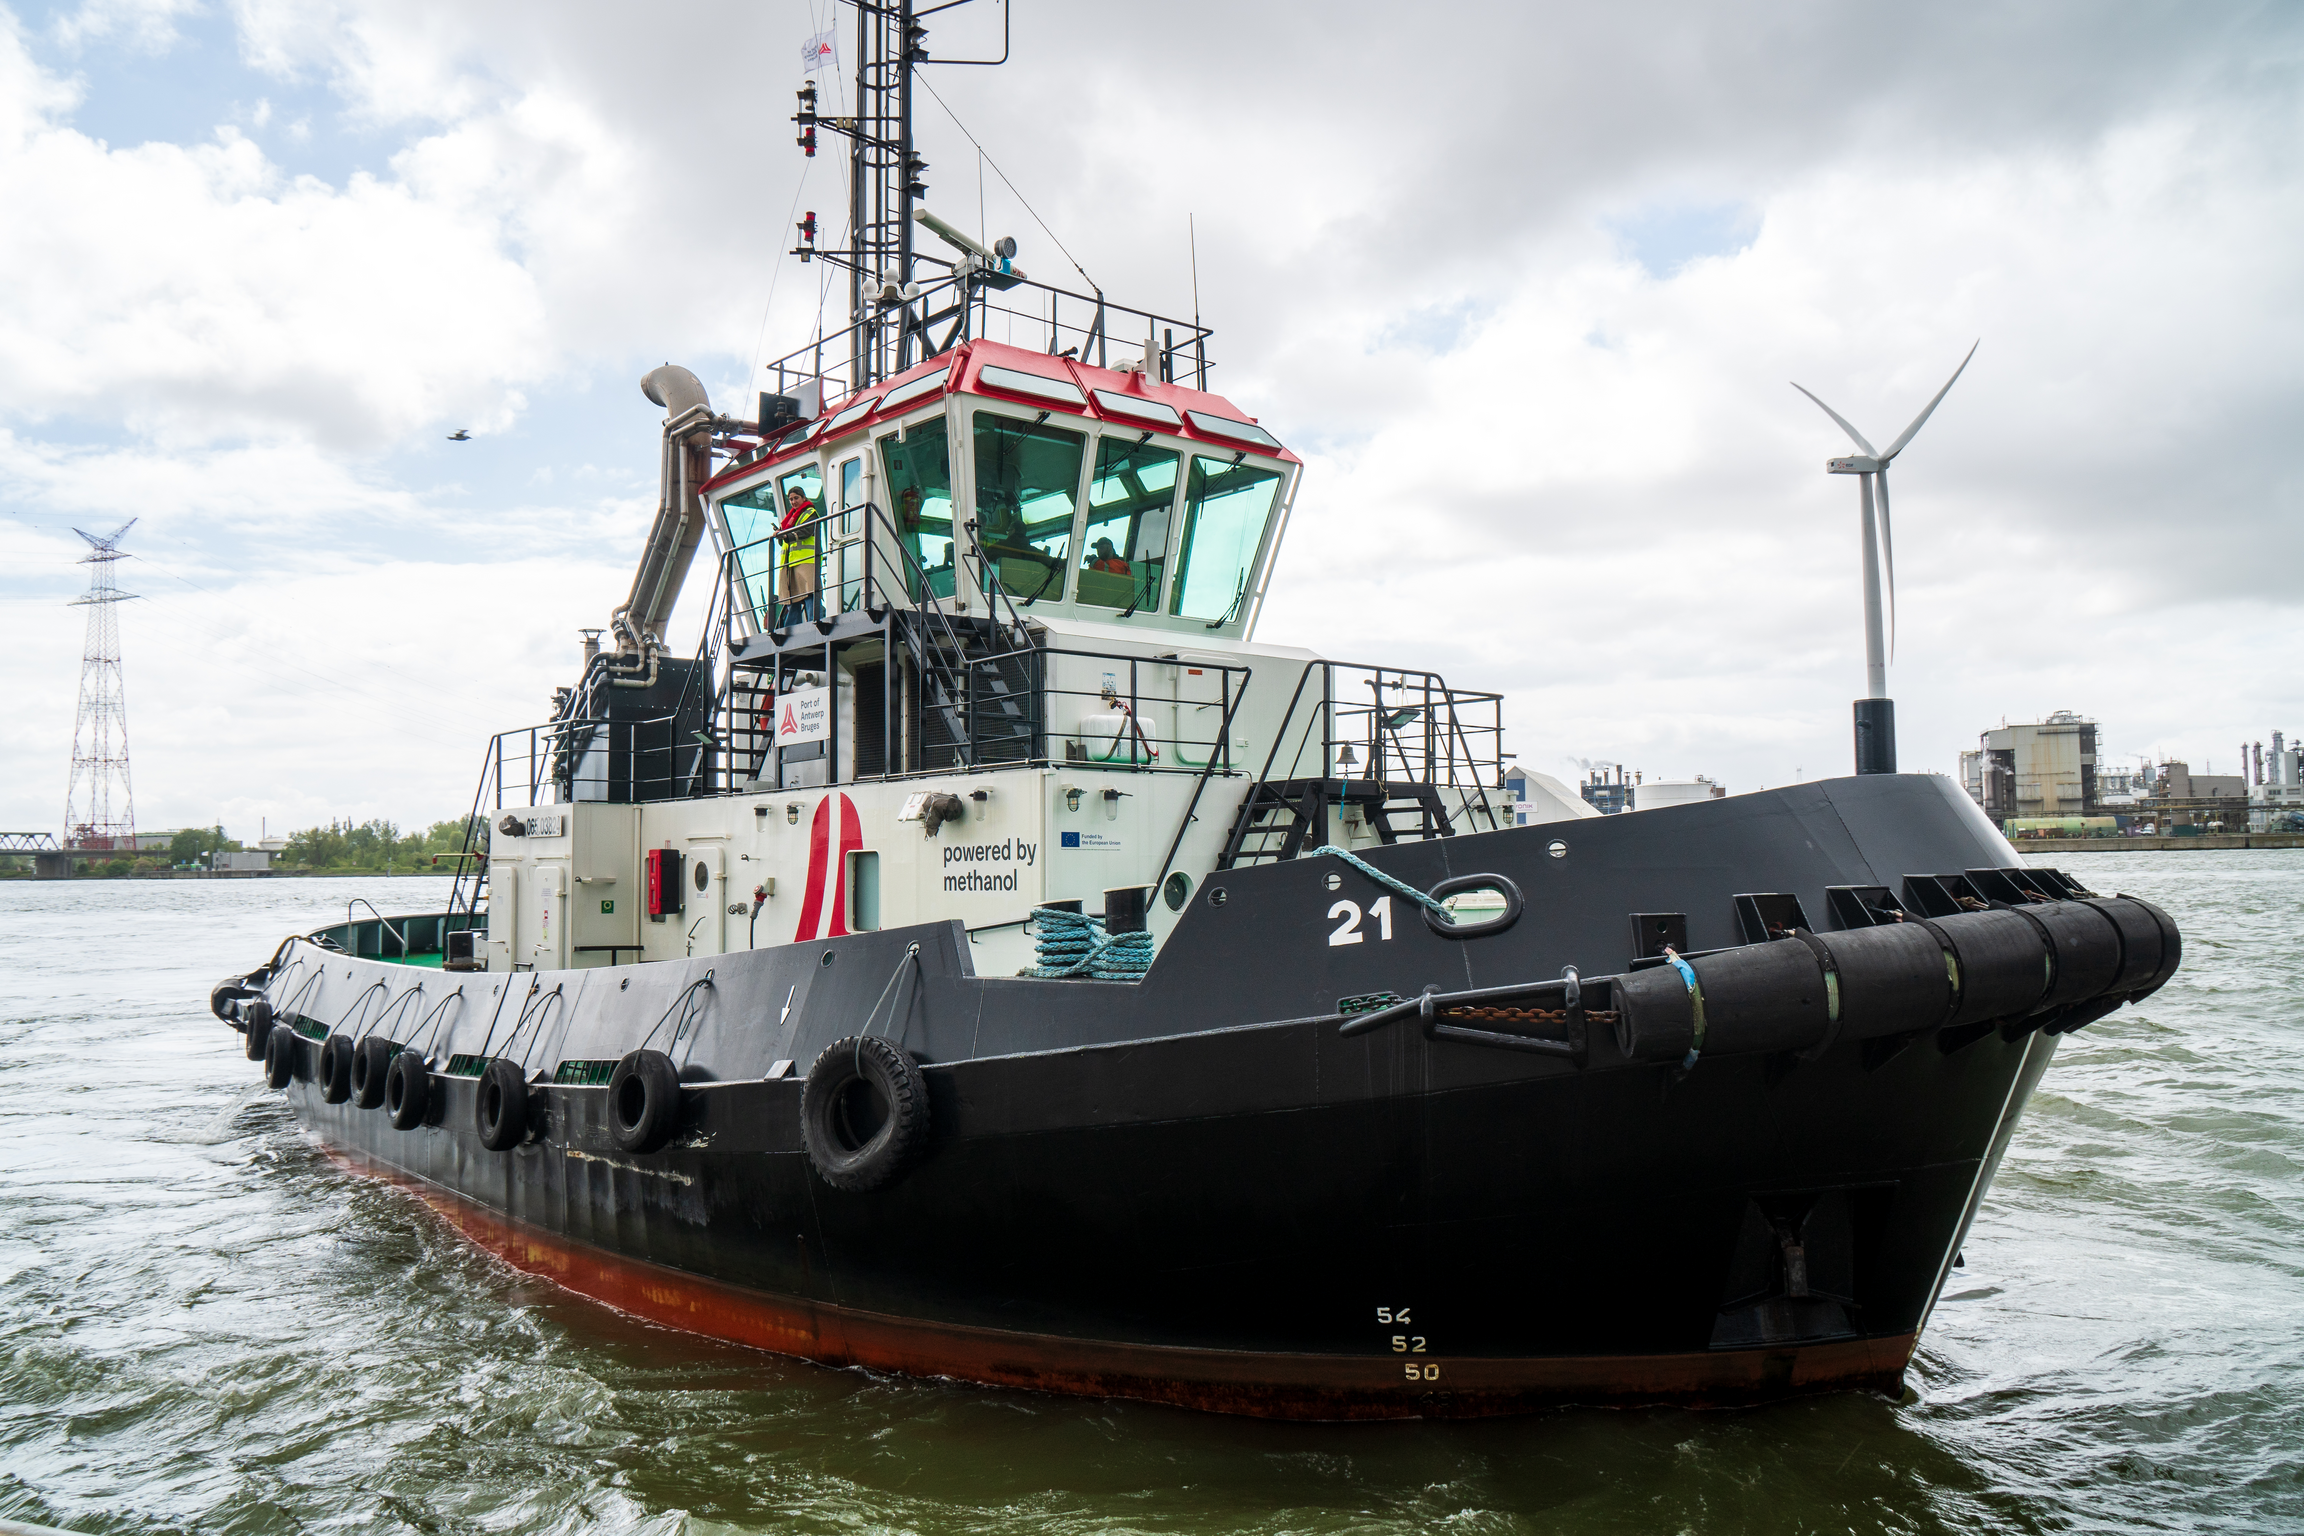 Port of Antwerp-Bruges launches the world's first methanol-powered tugboat 